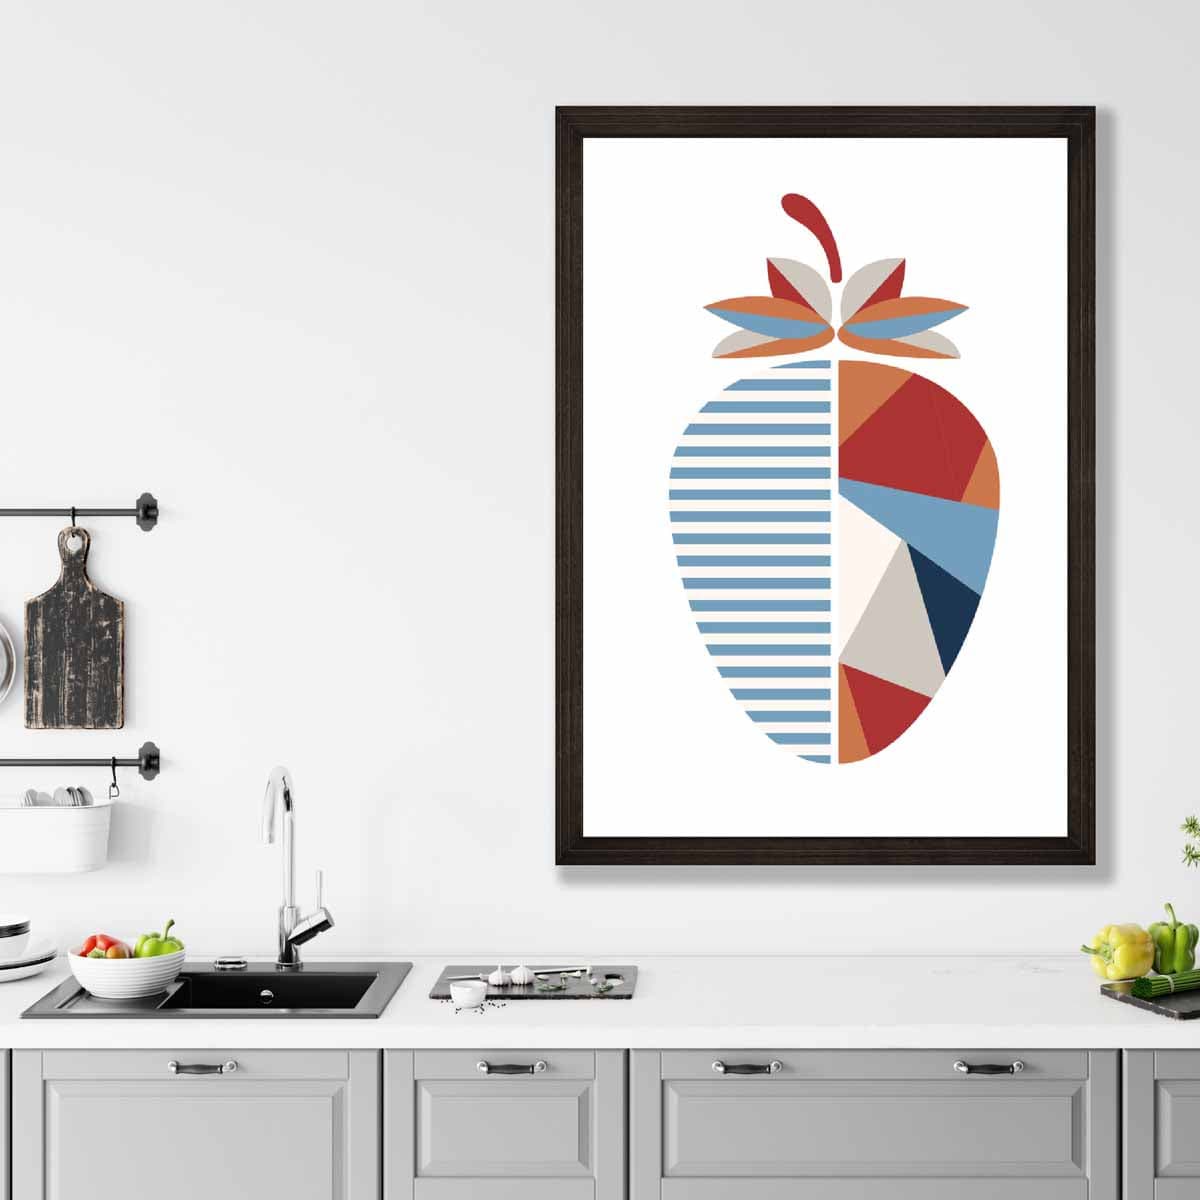 Geometric Fruit Poster of Strawberry in Red Orange Blue